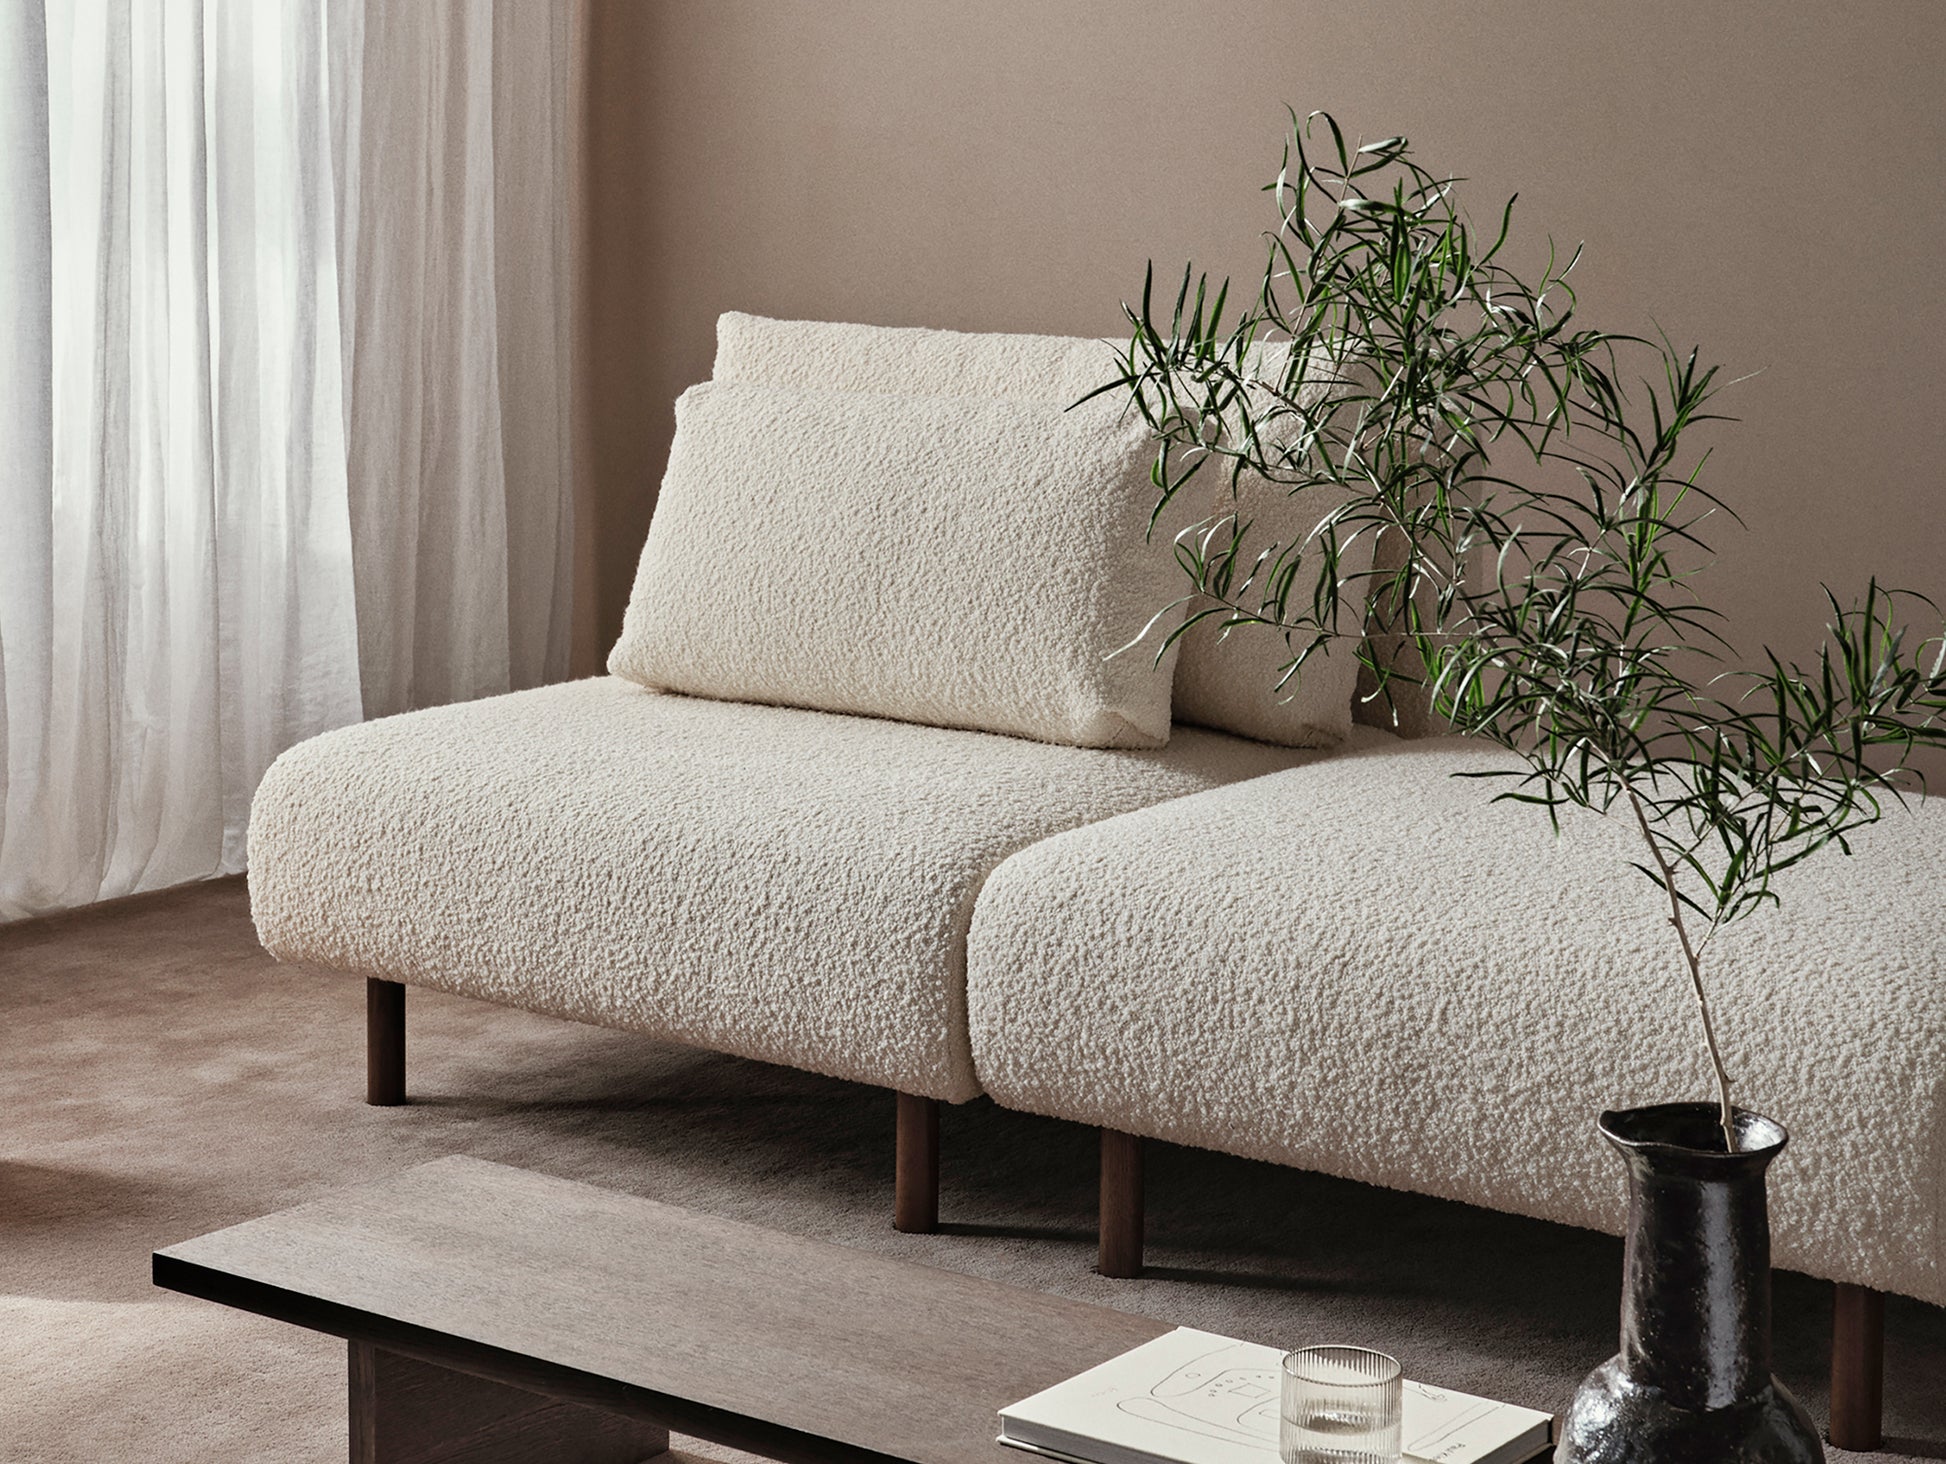 Dase Modular Sofa - Individual Modules by Ferm Living - Nordic Boucle / Off White